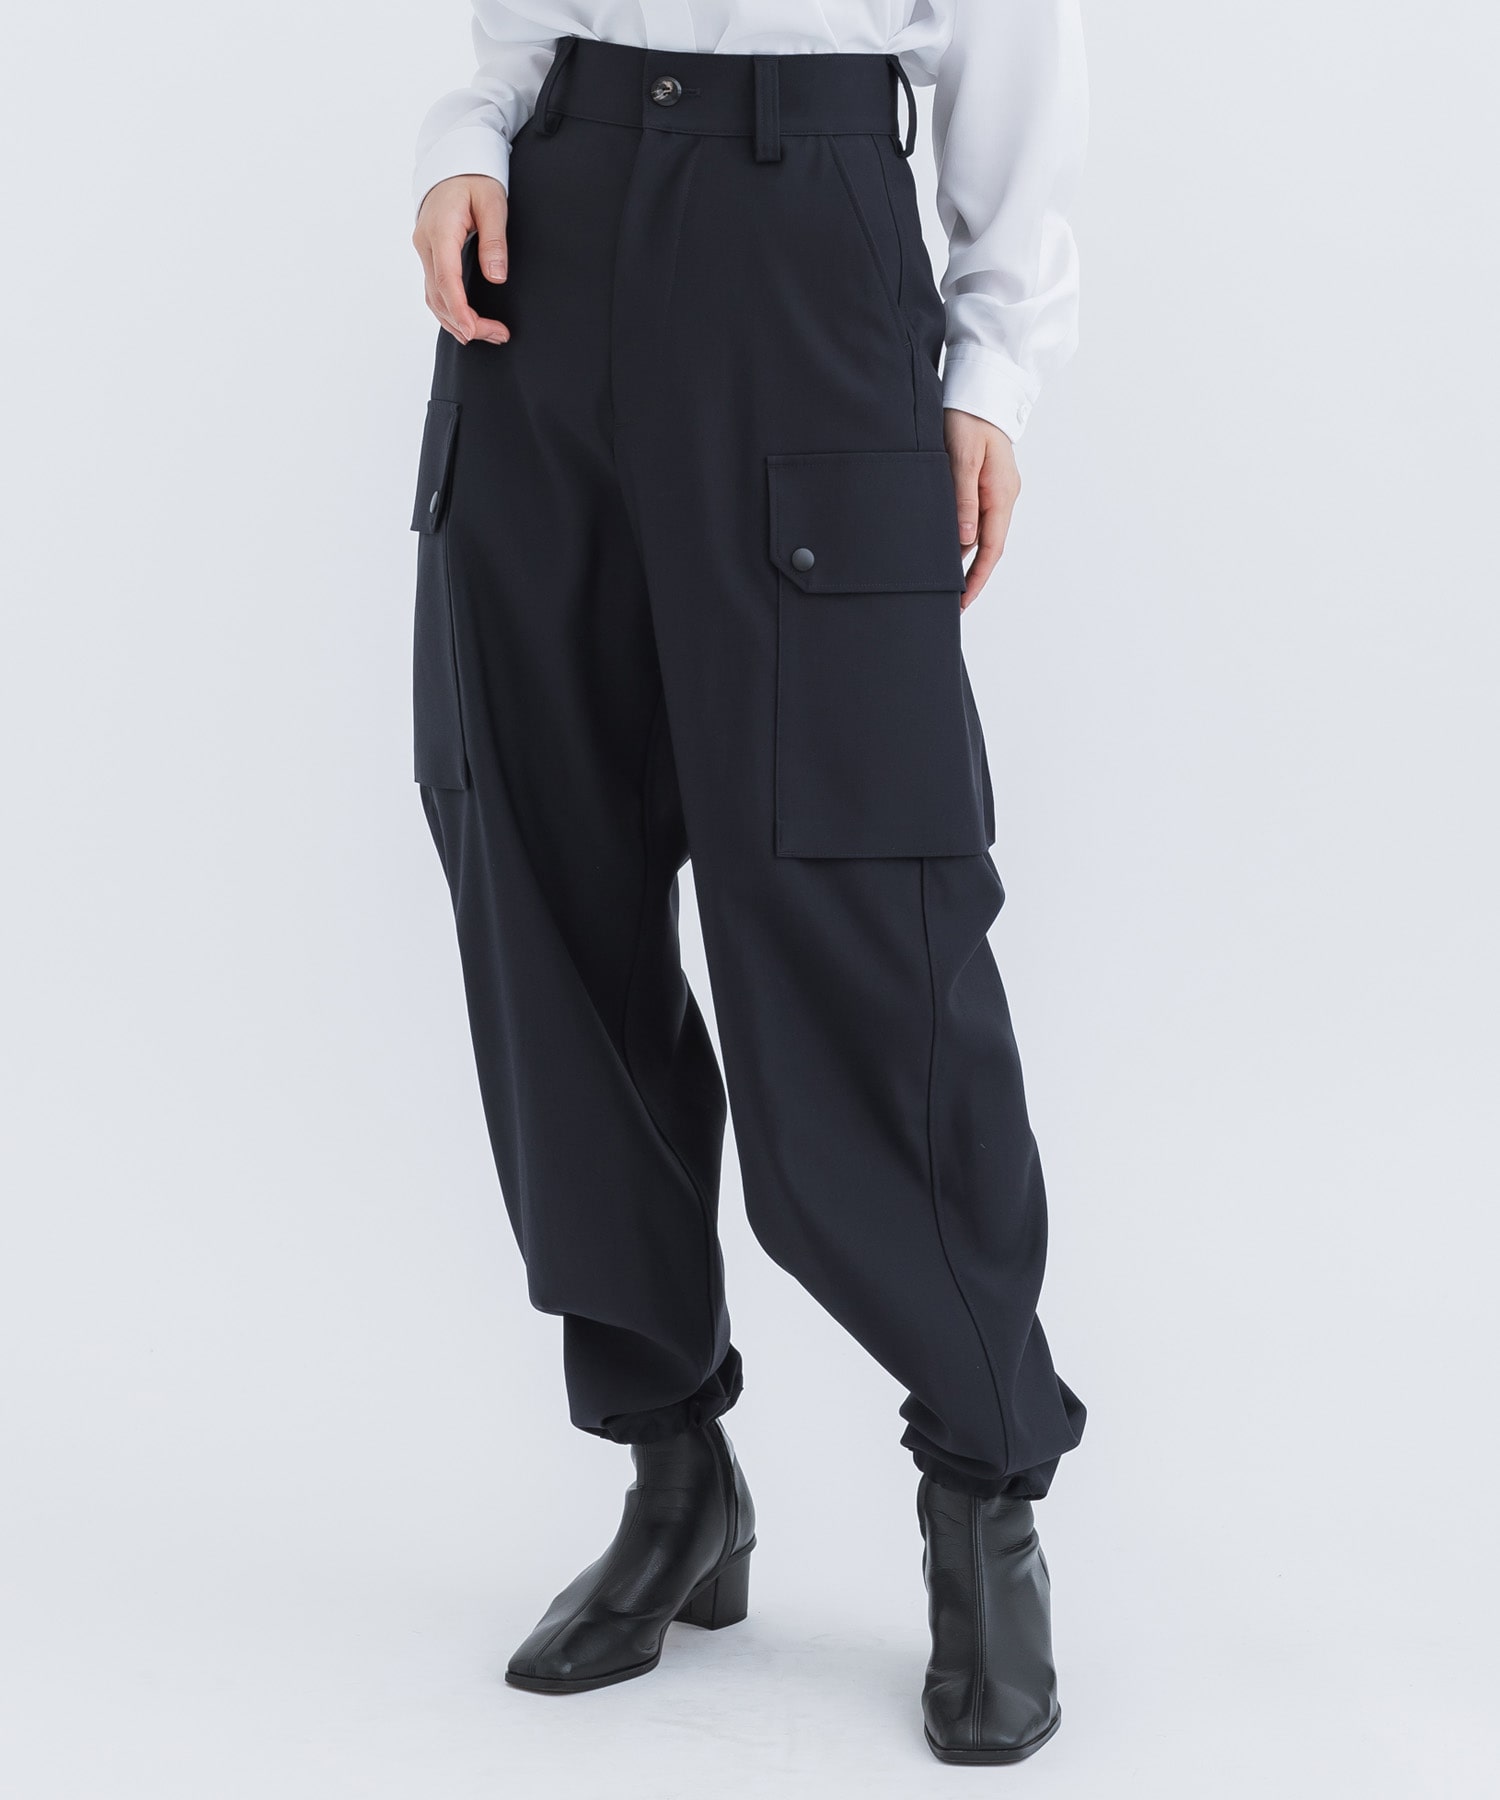 RERACS FRENCH ARMY F2 CARGO PANTS(36 DARK NAVY): THE RERACS